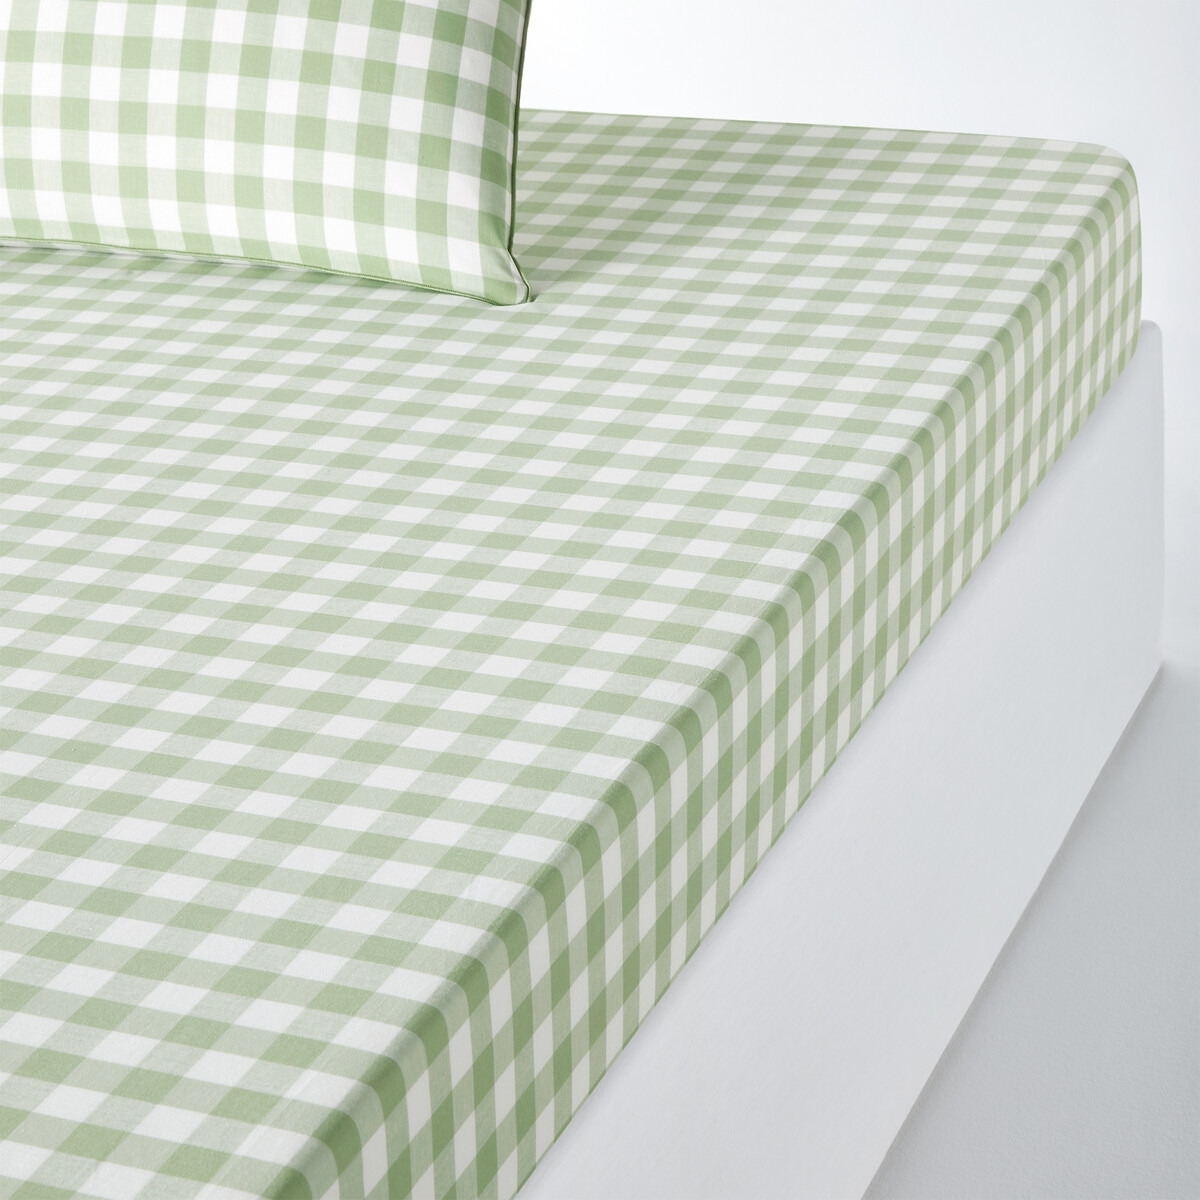 Veldi Green Gingham Check 100% Cotton Fitted Sheet - image 1